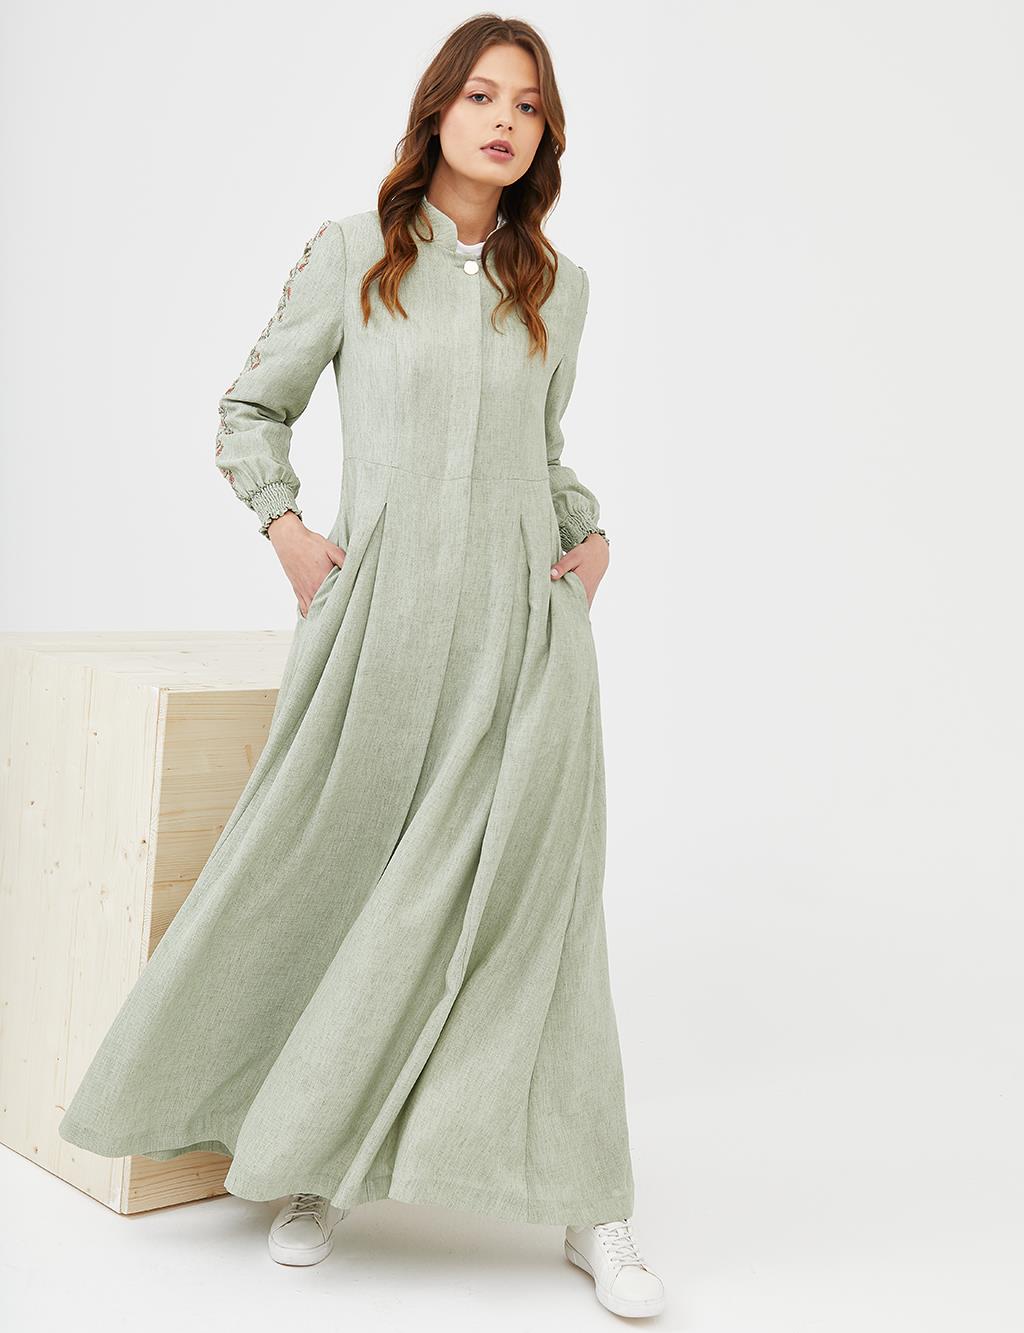 Embroidered Long Topcoat B21 15007 Water Green